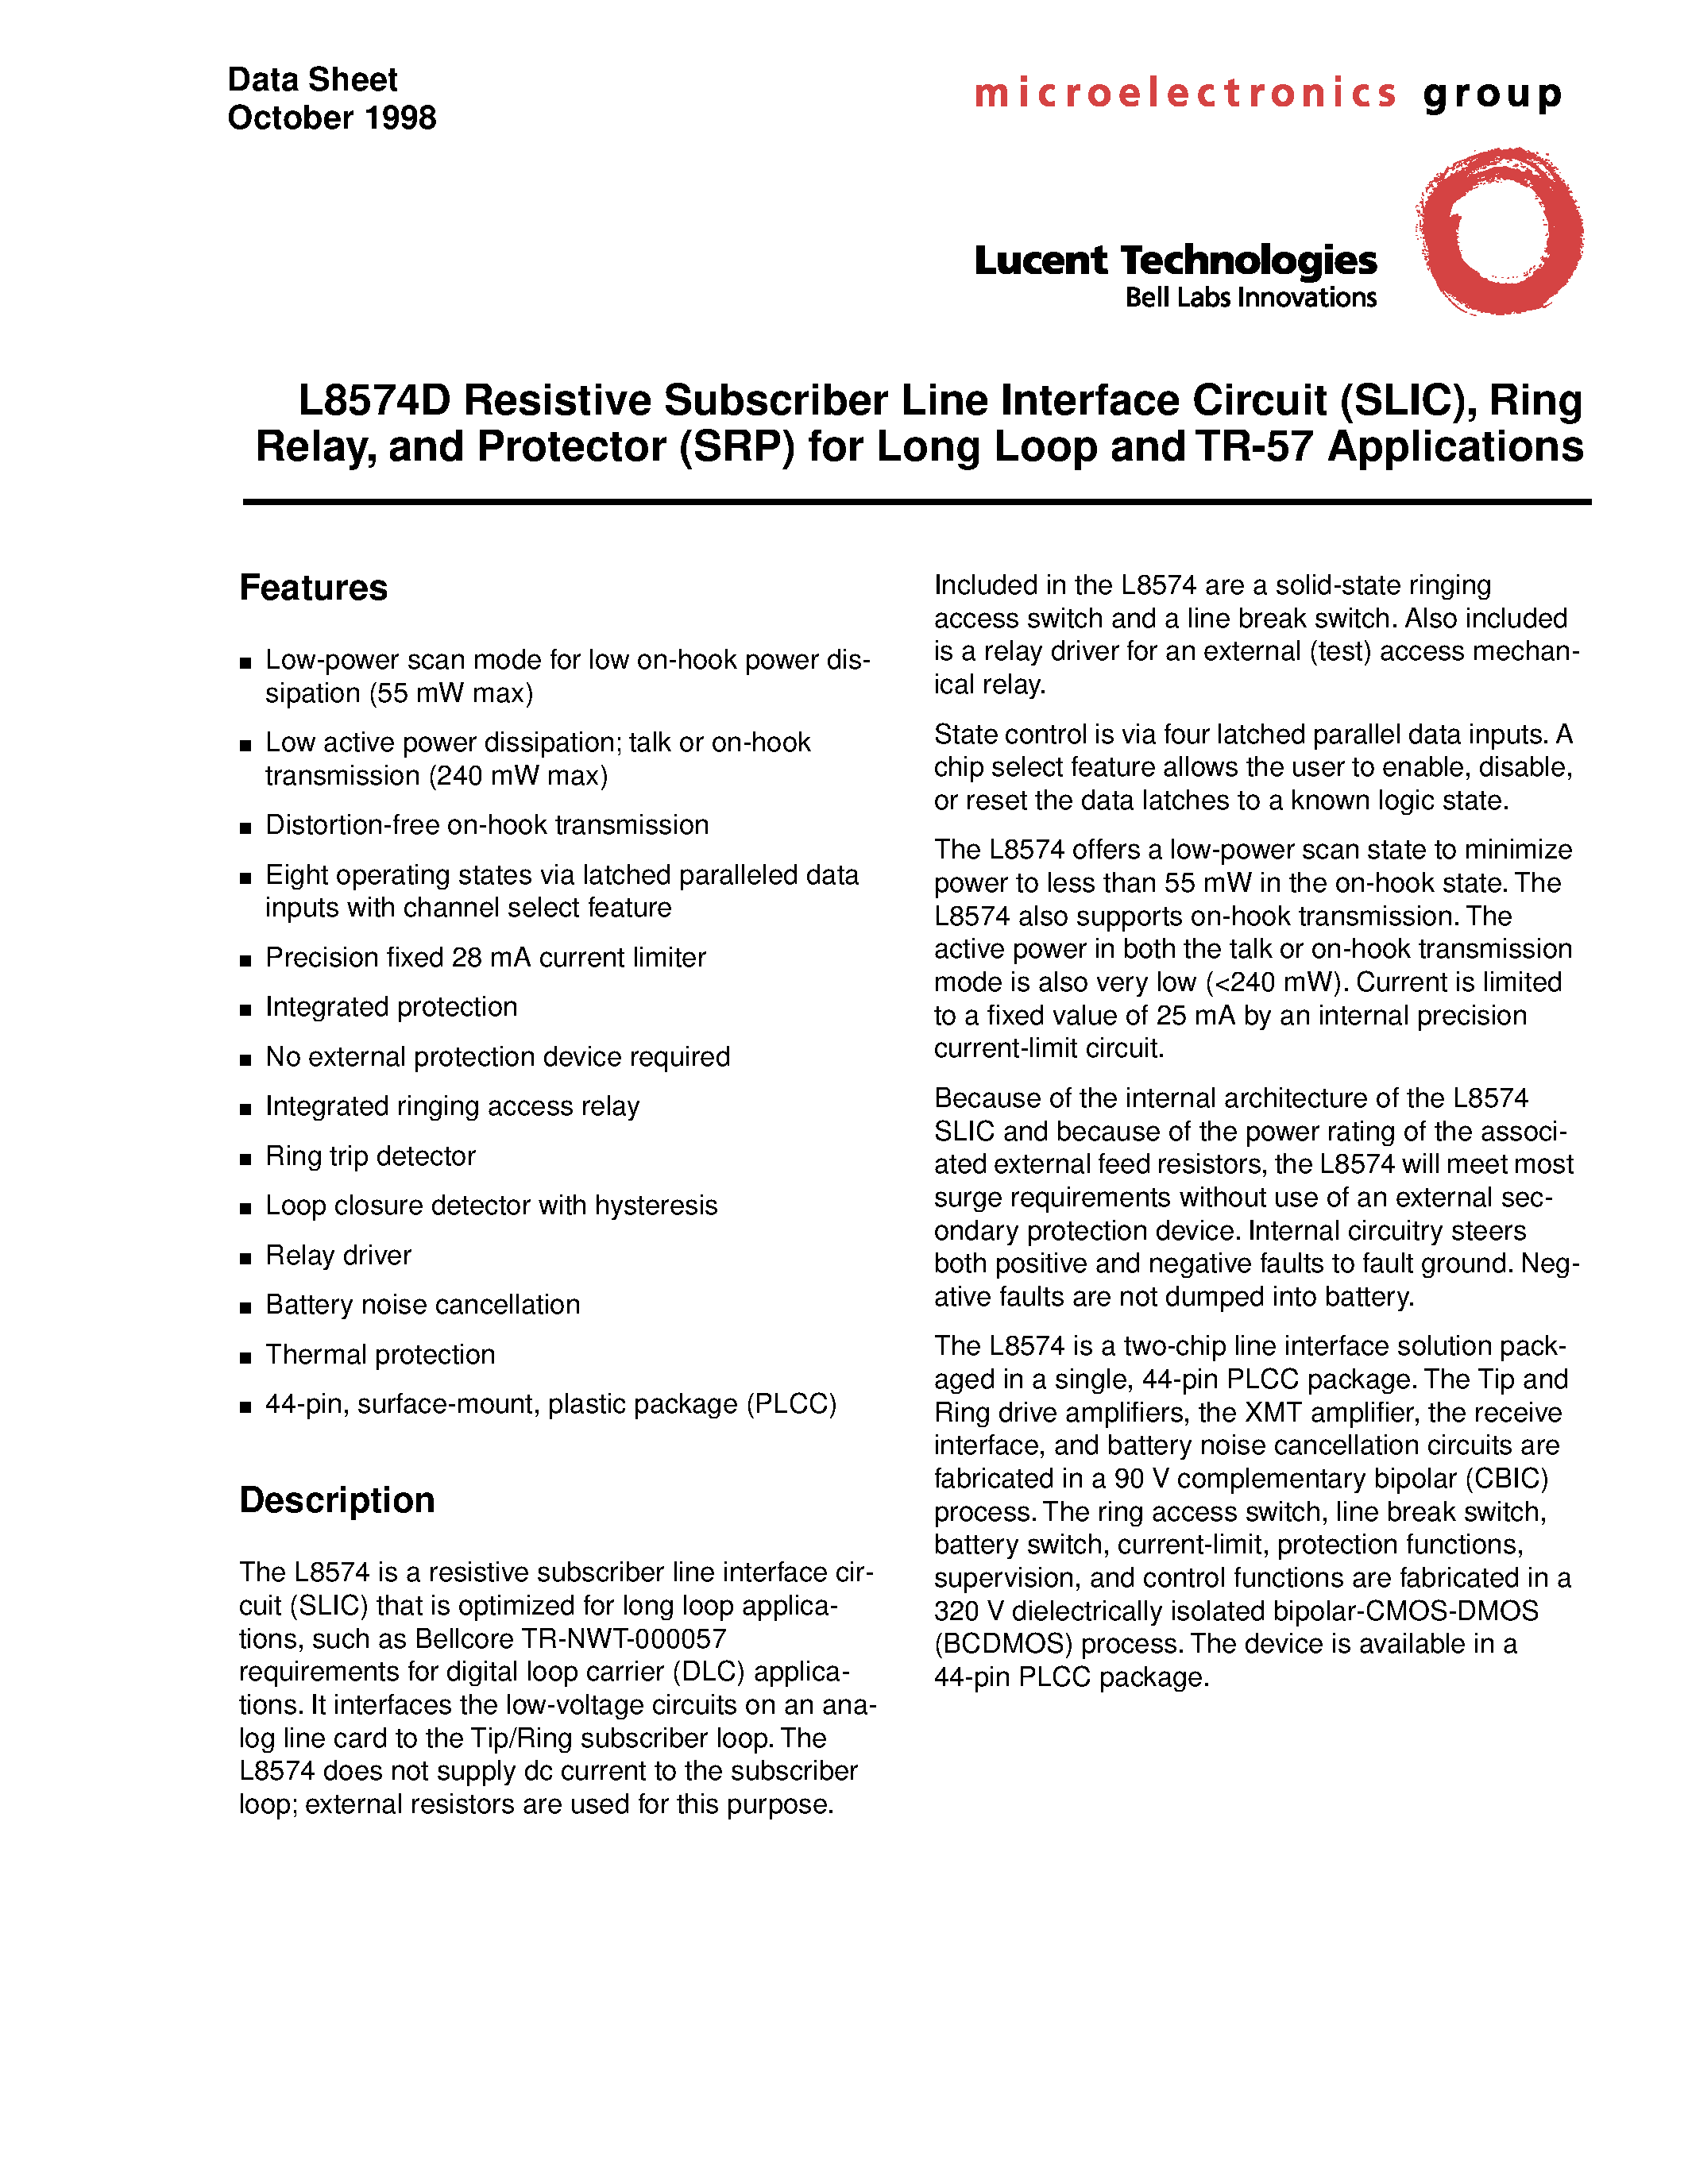 Datasheet LUCL8574DP-DT - L8574D Resistive Subscriber Line Interface Circuit(SLIC)/ Ring Relay/and Protector(SRP)for Long Loop and TR-57 Applications page 1